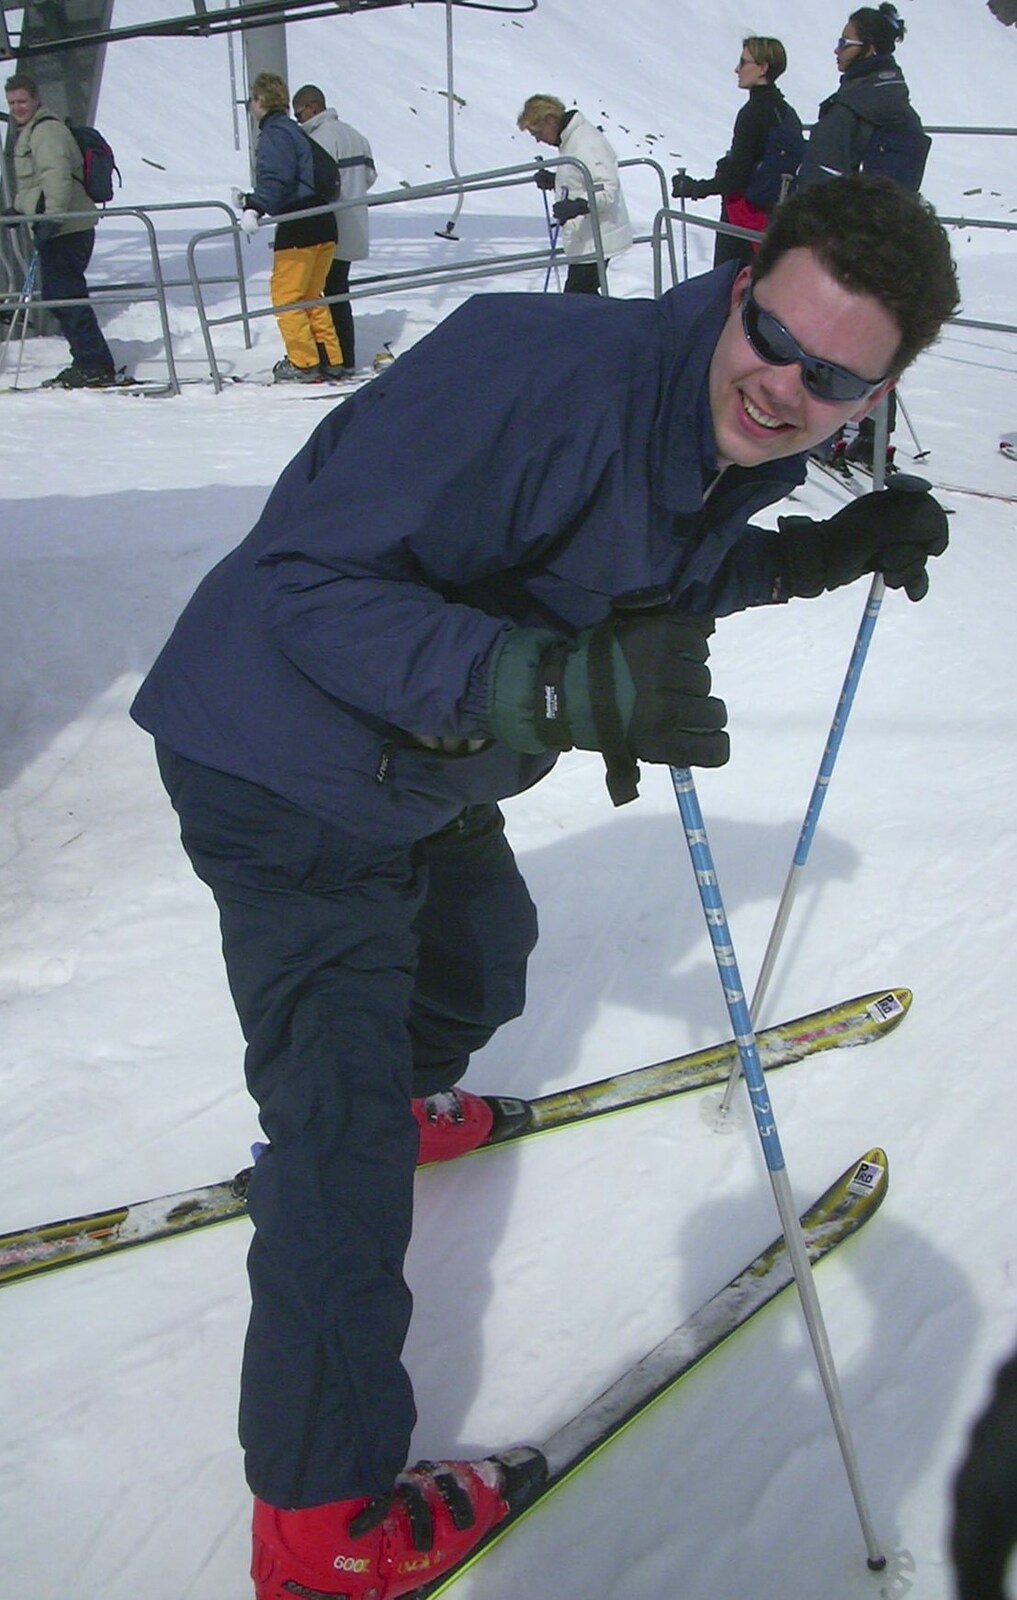 Dave Reid on skis from 3G Lab Goes Skiing In Chamonix, France - 12th March 2002